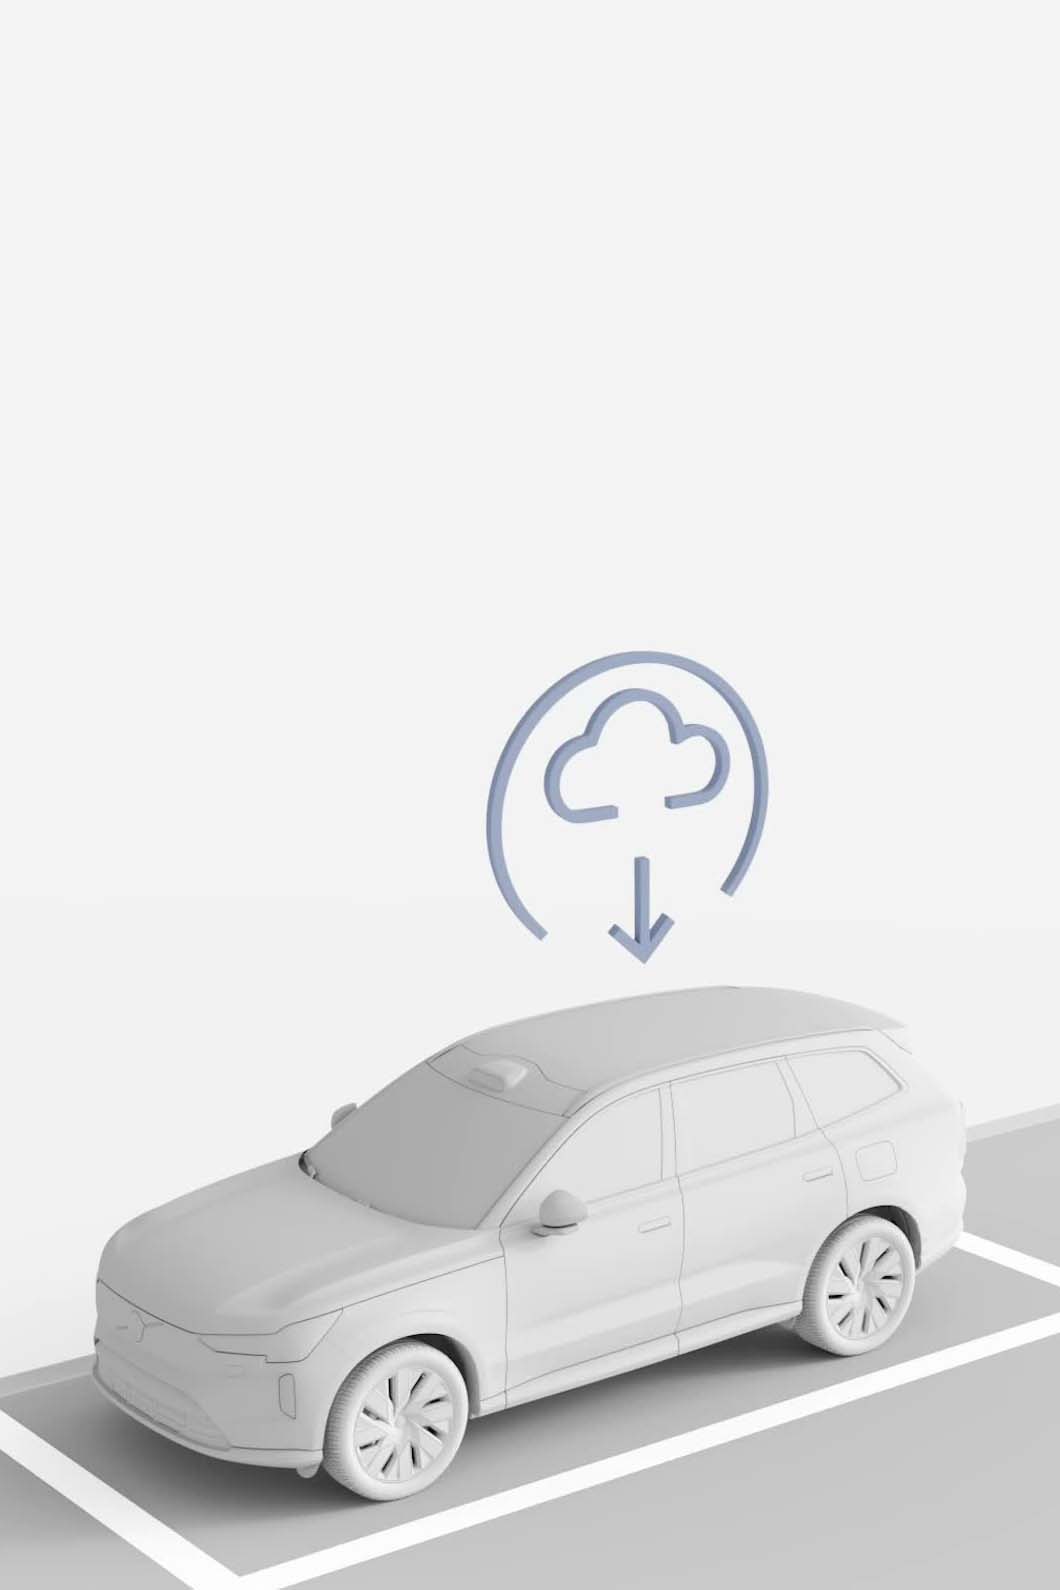 Illustration of a Volvo car getting a software update from the cloud. 